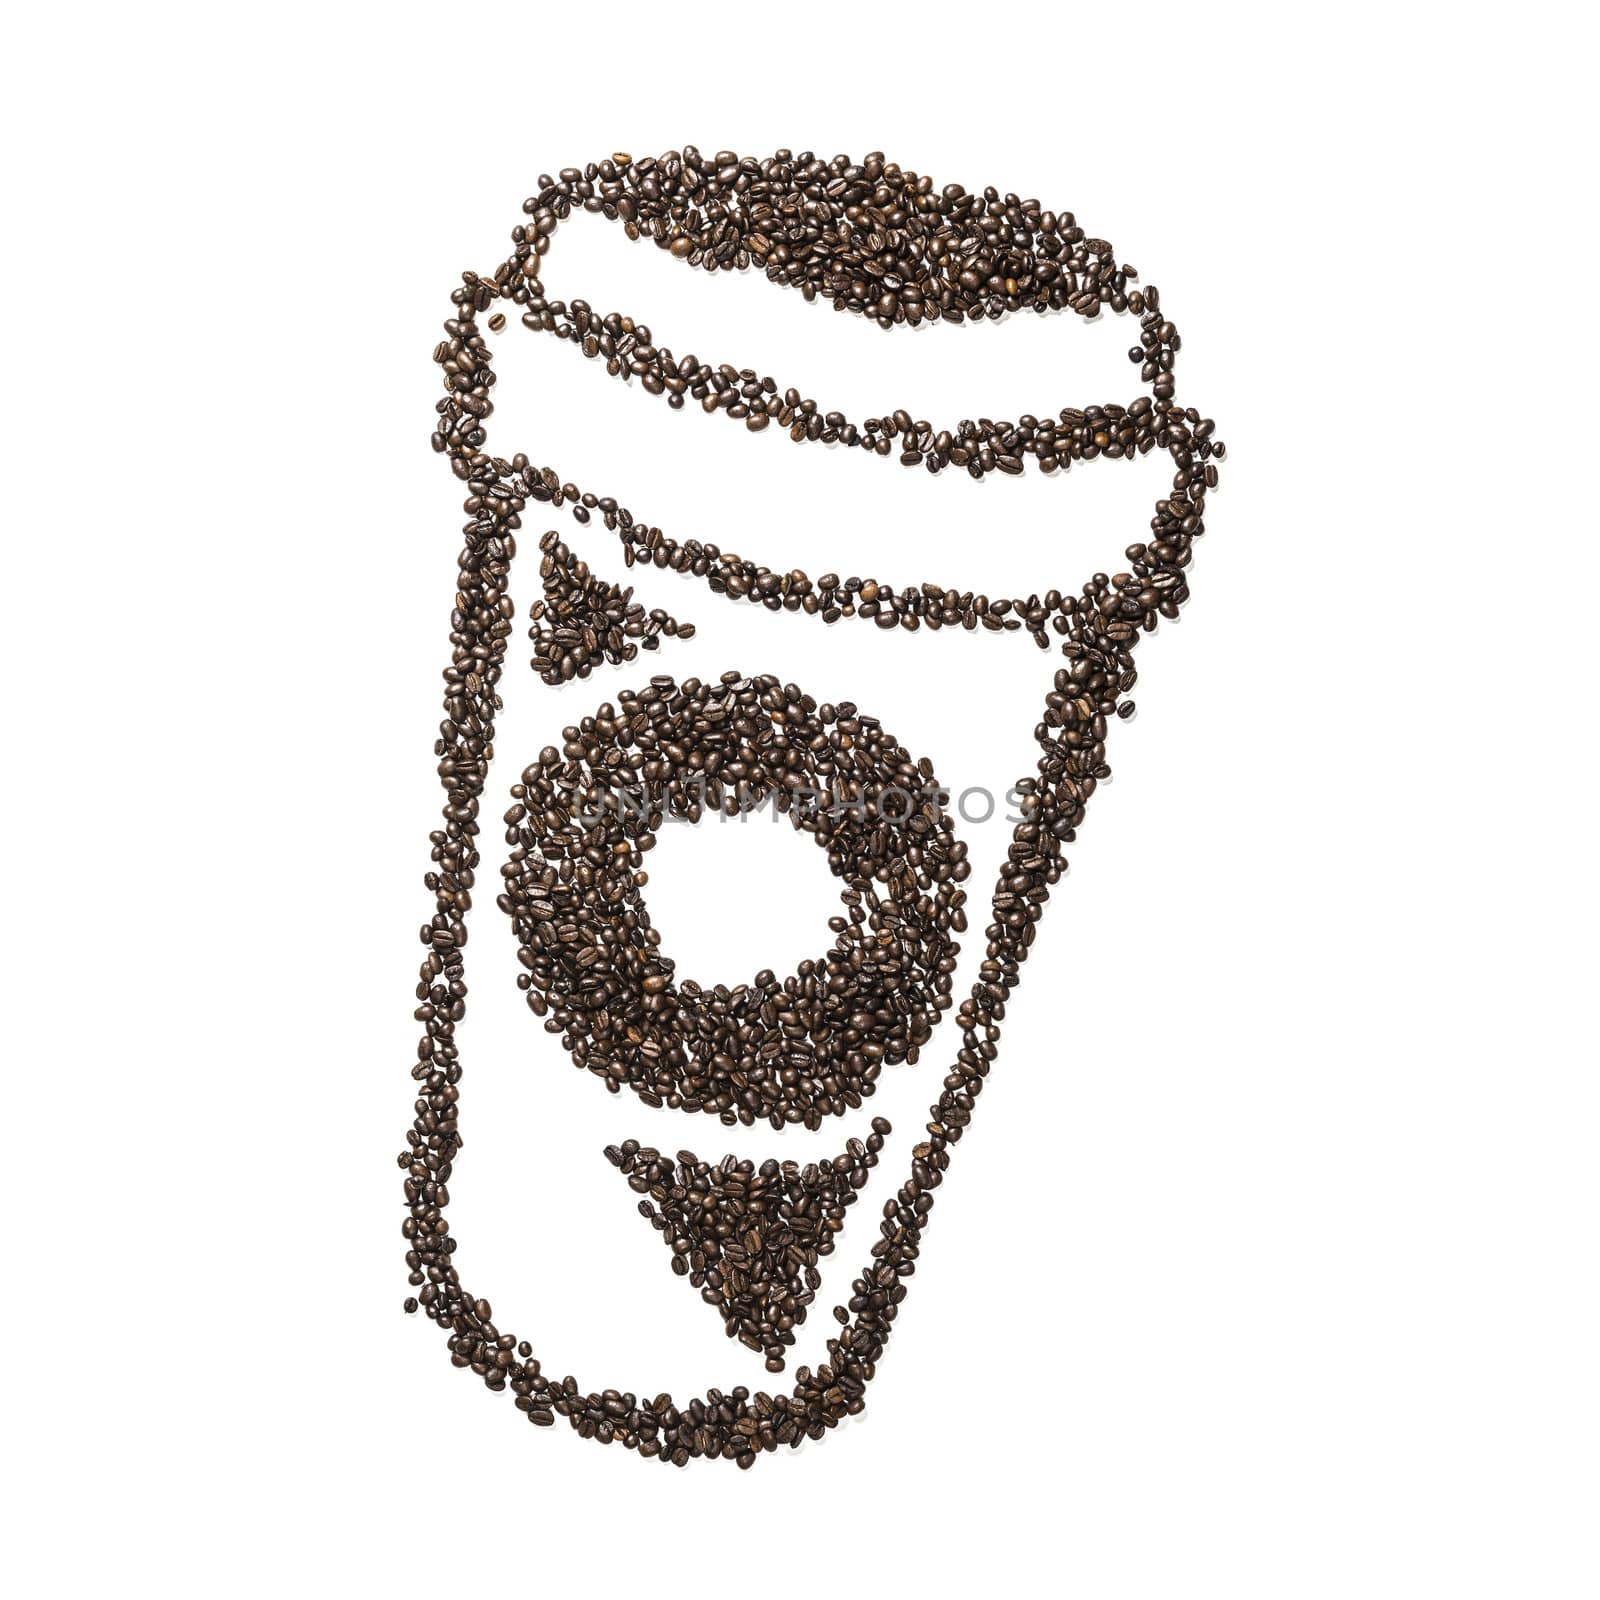 Image of a coffee to go cup made from coffee beans isolated on white background